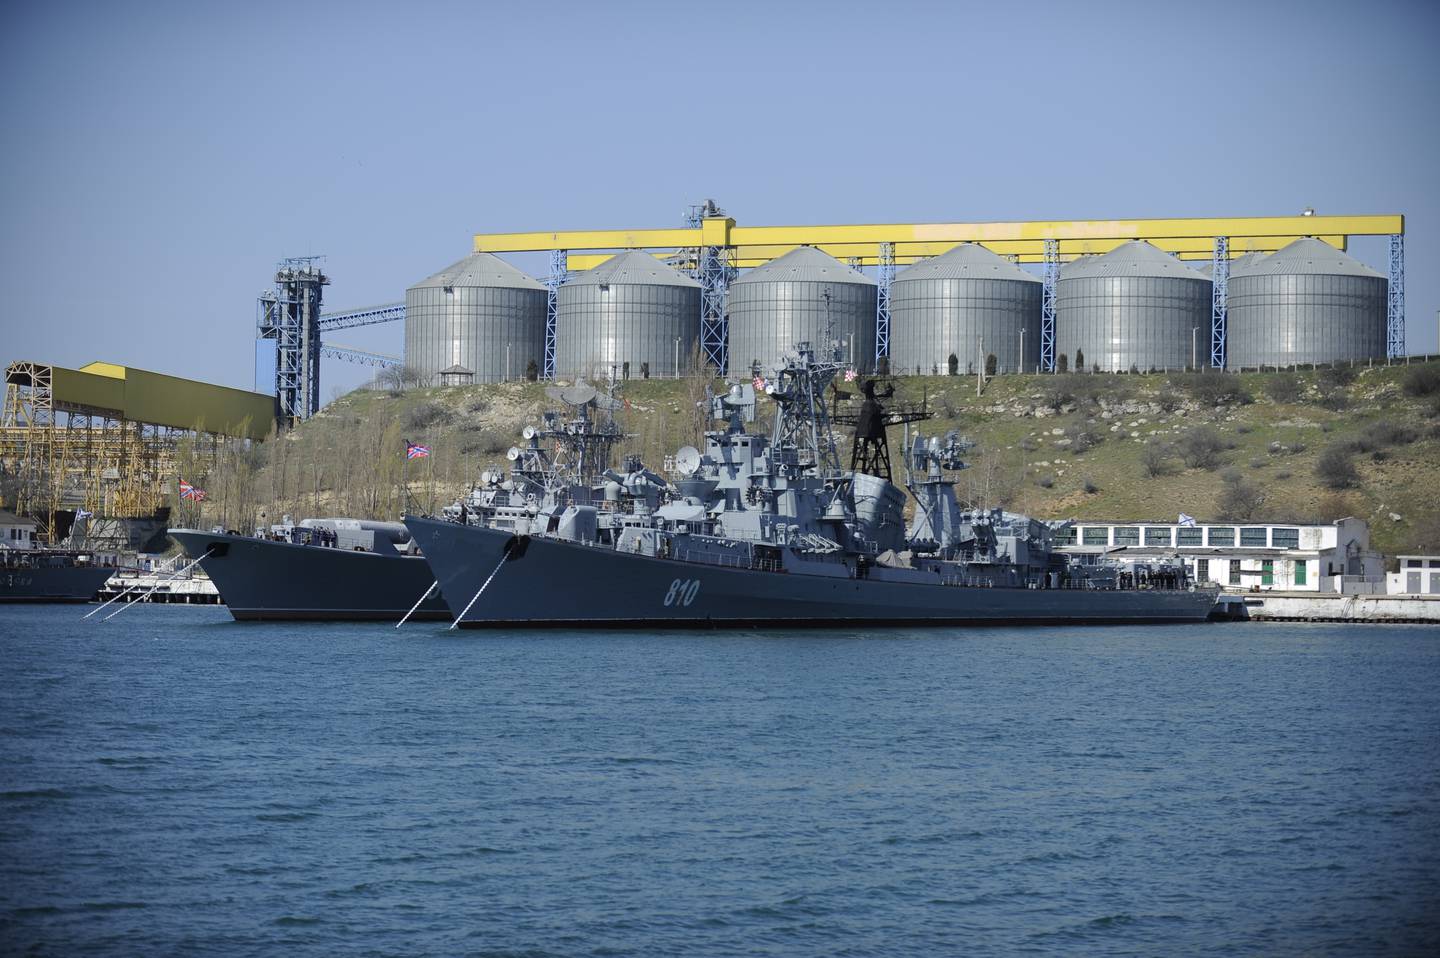 FILE - In this Monday, March 31, 2014 file photo Russian Black Sea fleet ships are anchored in one of the bays of Sevastopol, Crimea. With hundreds of new aircraft, tanks and missiles rolling off assembly lines and Russian jets buzzing European skies under NATOs wary eye, it doesnt look like Russias economic woes have had any impact on the Kremlins ambitious military modernization program. (AP Photo/Andrew Lubimov, File)